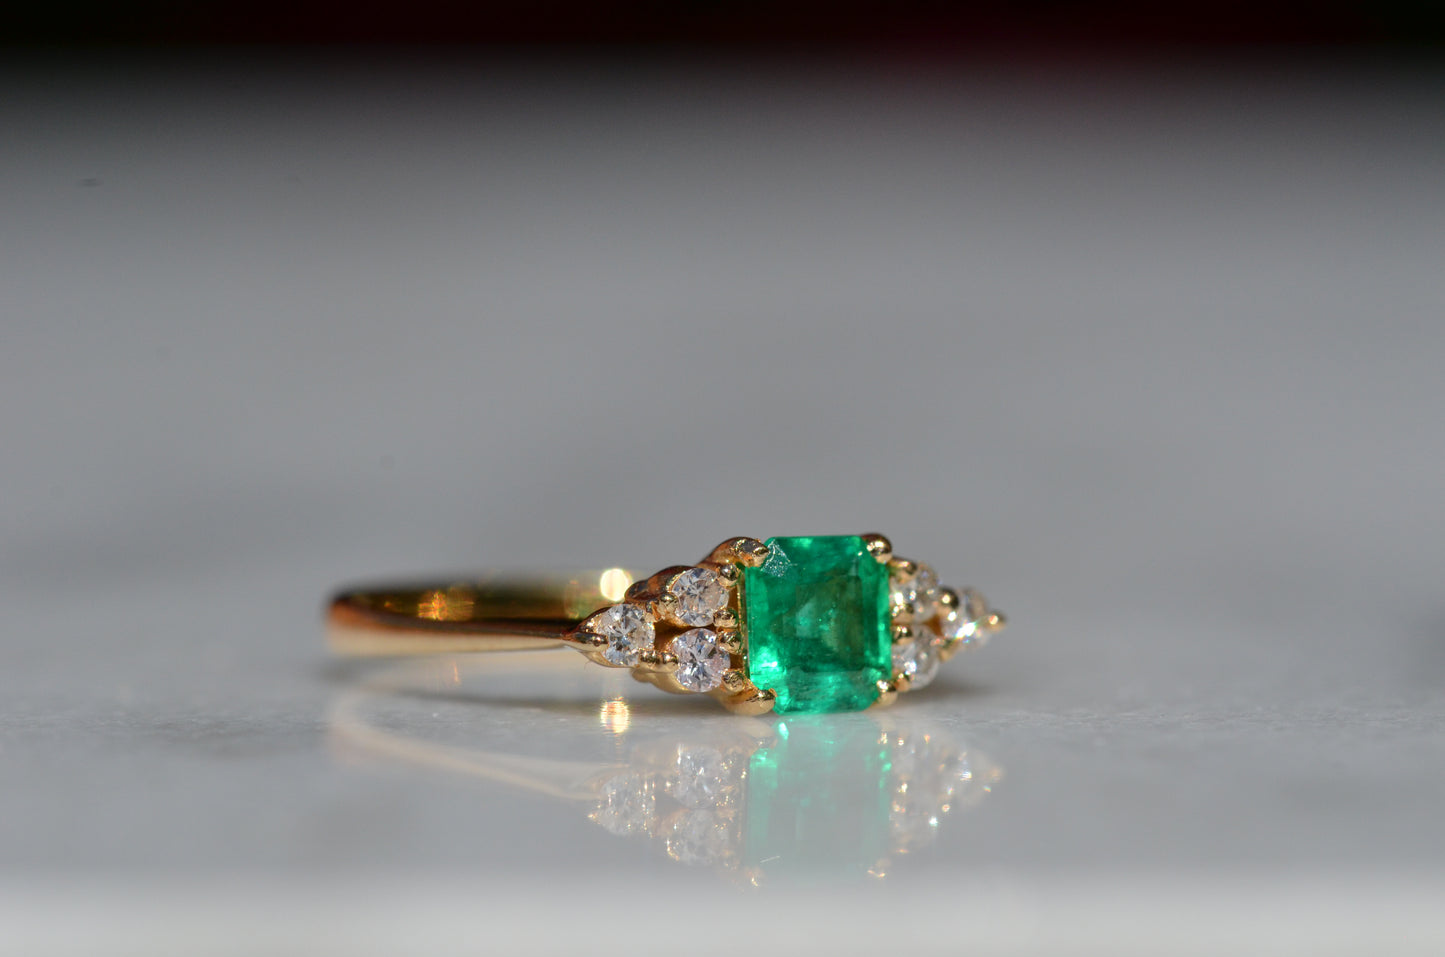 Close-cropped macro of a vintage ring, featuring a square emerald-cut emerald flanked by three round diamonds arranged in a triangular cluster on each shoulder. Viewed turned to the right to highlight the side of the ring.